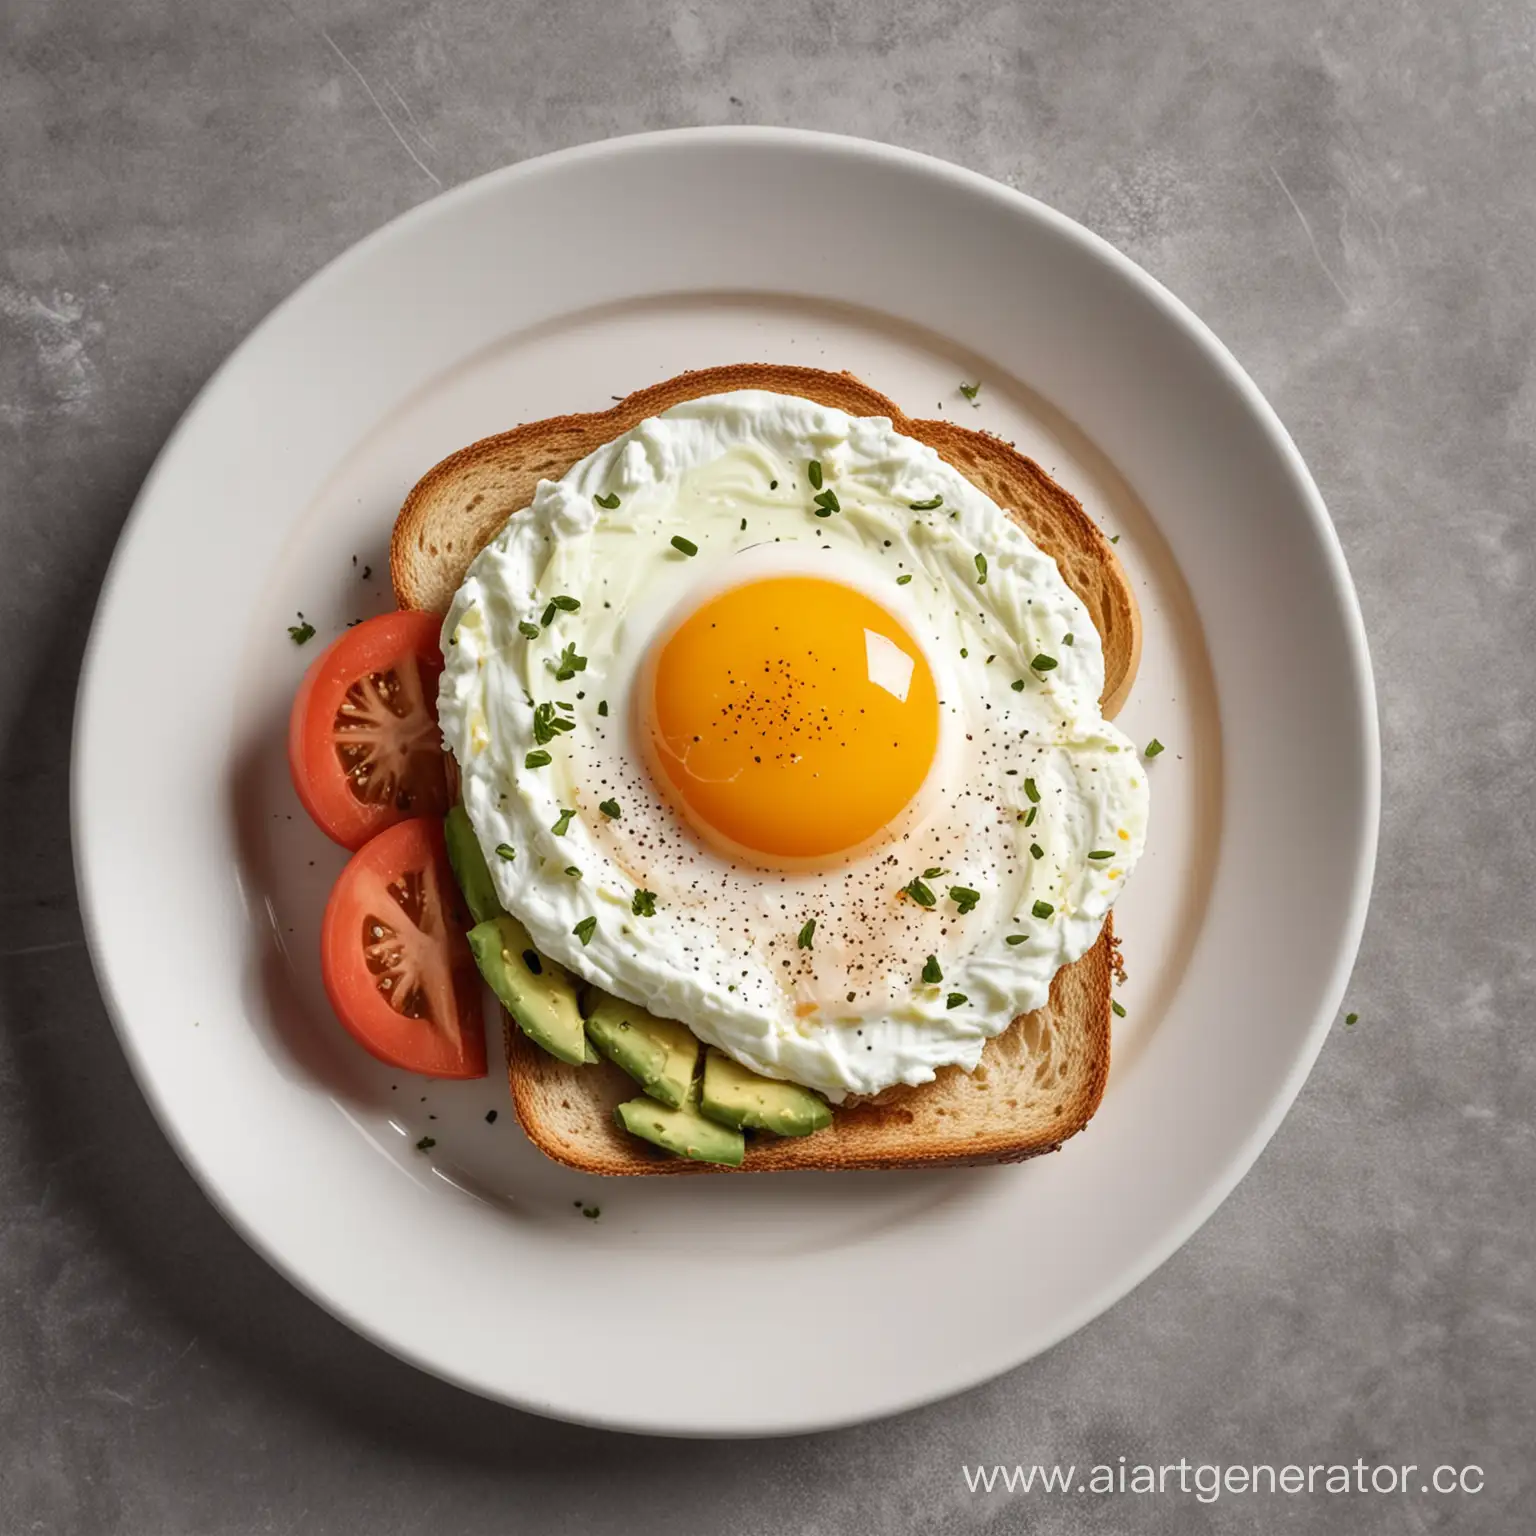 one toast in a white plate on a gray table. One bread toast with cream cheese, mashed avocado, tomato slices and a fried egg on top. Top sprinkled with herbs. this should be realistic, like made by an ordinary person in rush. , high-angle, super realistic shot, look like a phone photo